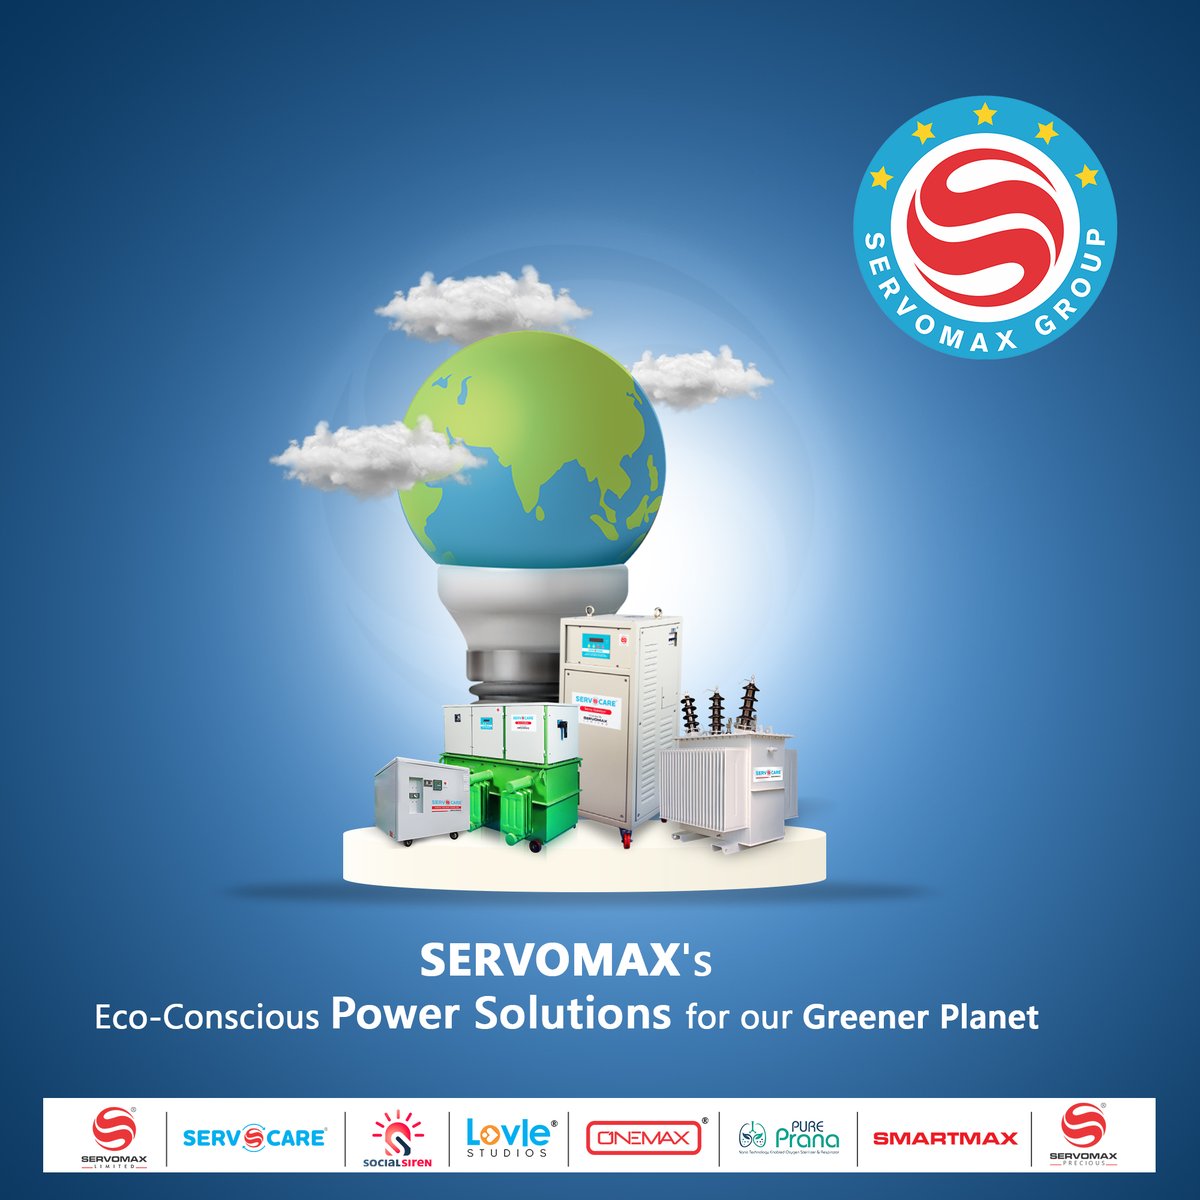 SERVOMAX always believes in manufacturing Eco-Conscious Power Solutions for our customers.

#EcoFriendly #EcoFriendlyPower #power #saving #Electronics #manufacturer #GreenEnergy

#SERVOCARE